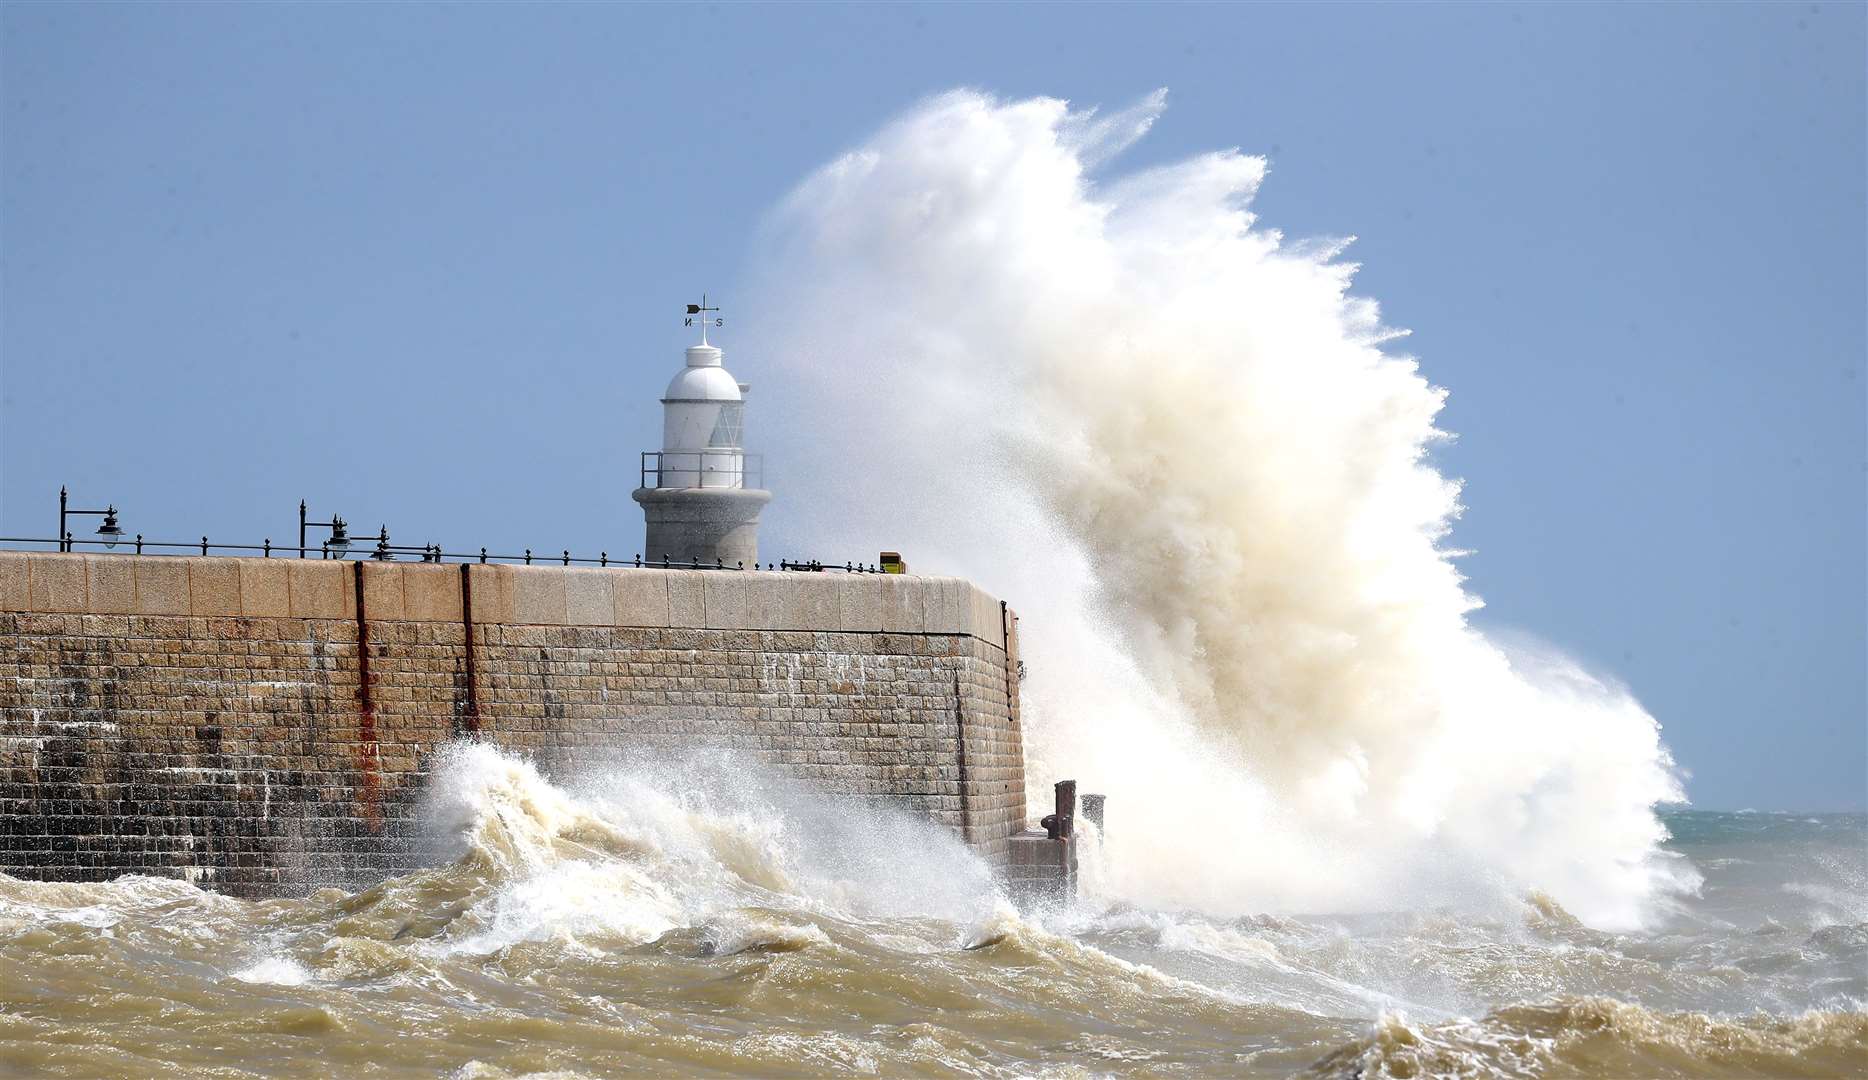 Waves crash over the harbour wall in Folkestone, Kent, on August 21 (Gareth Fuller/PA)